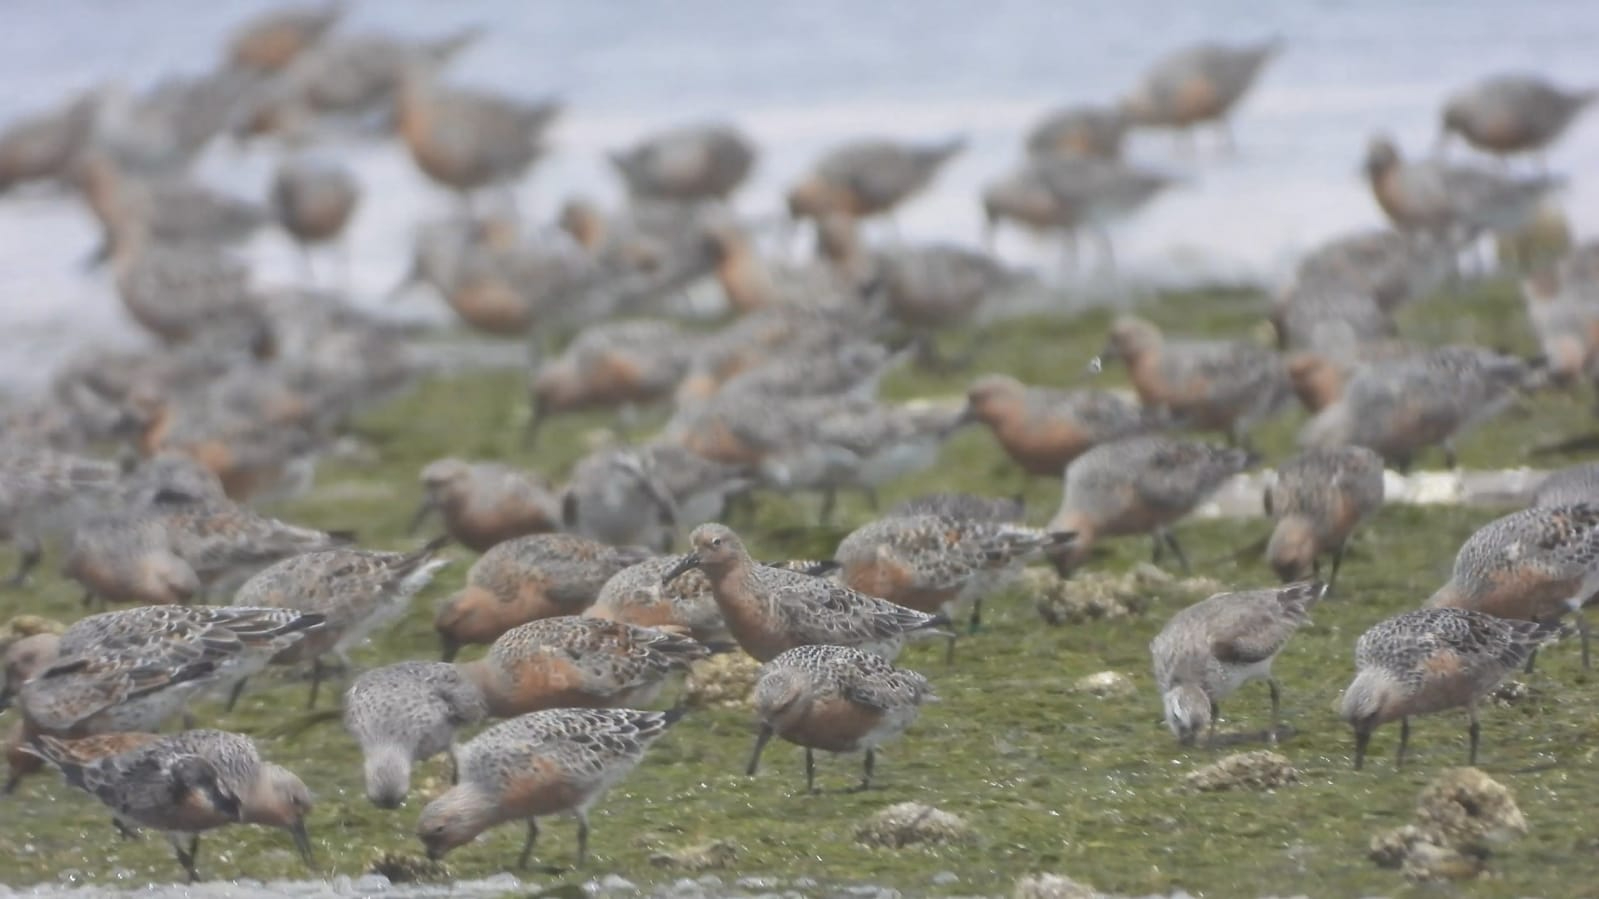 Knots before high tide at Abelgh Eiznaya, 3 transmitter birds were spotted in just this flock. Photo: Tim Oortwijn